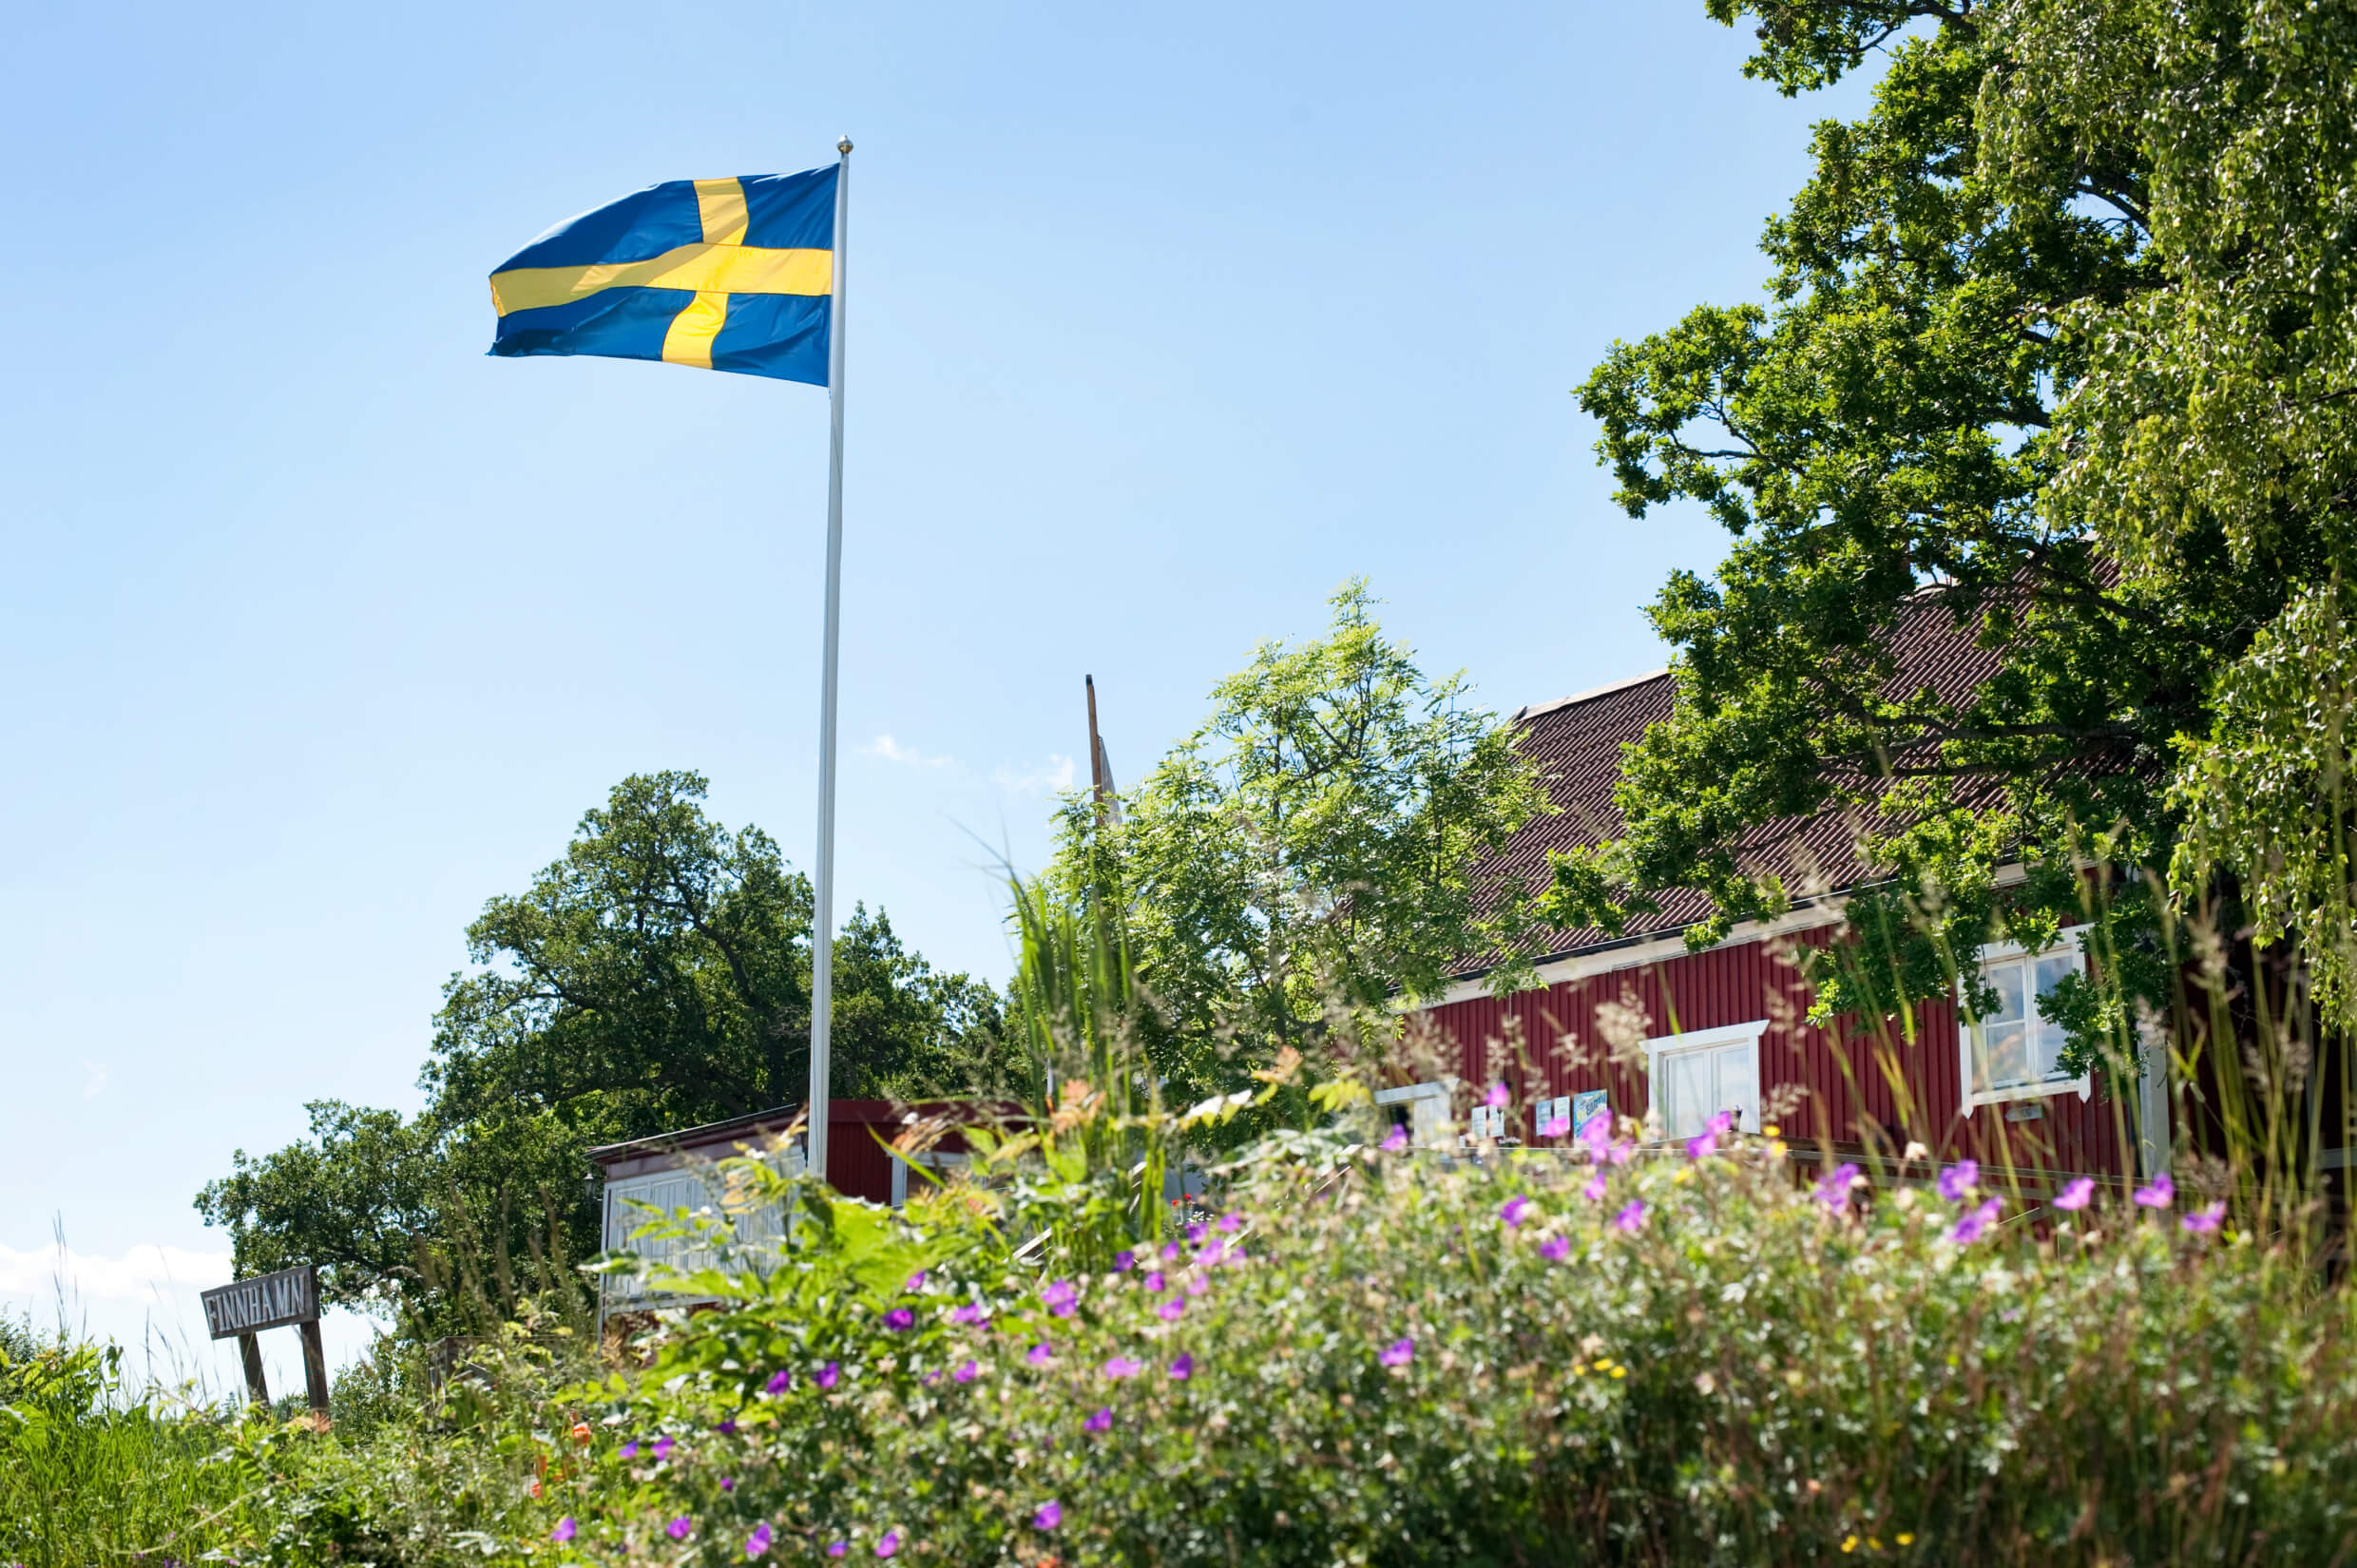 Through the Eyes of a Swedish Homecomer